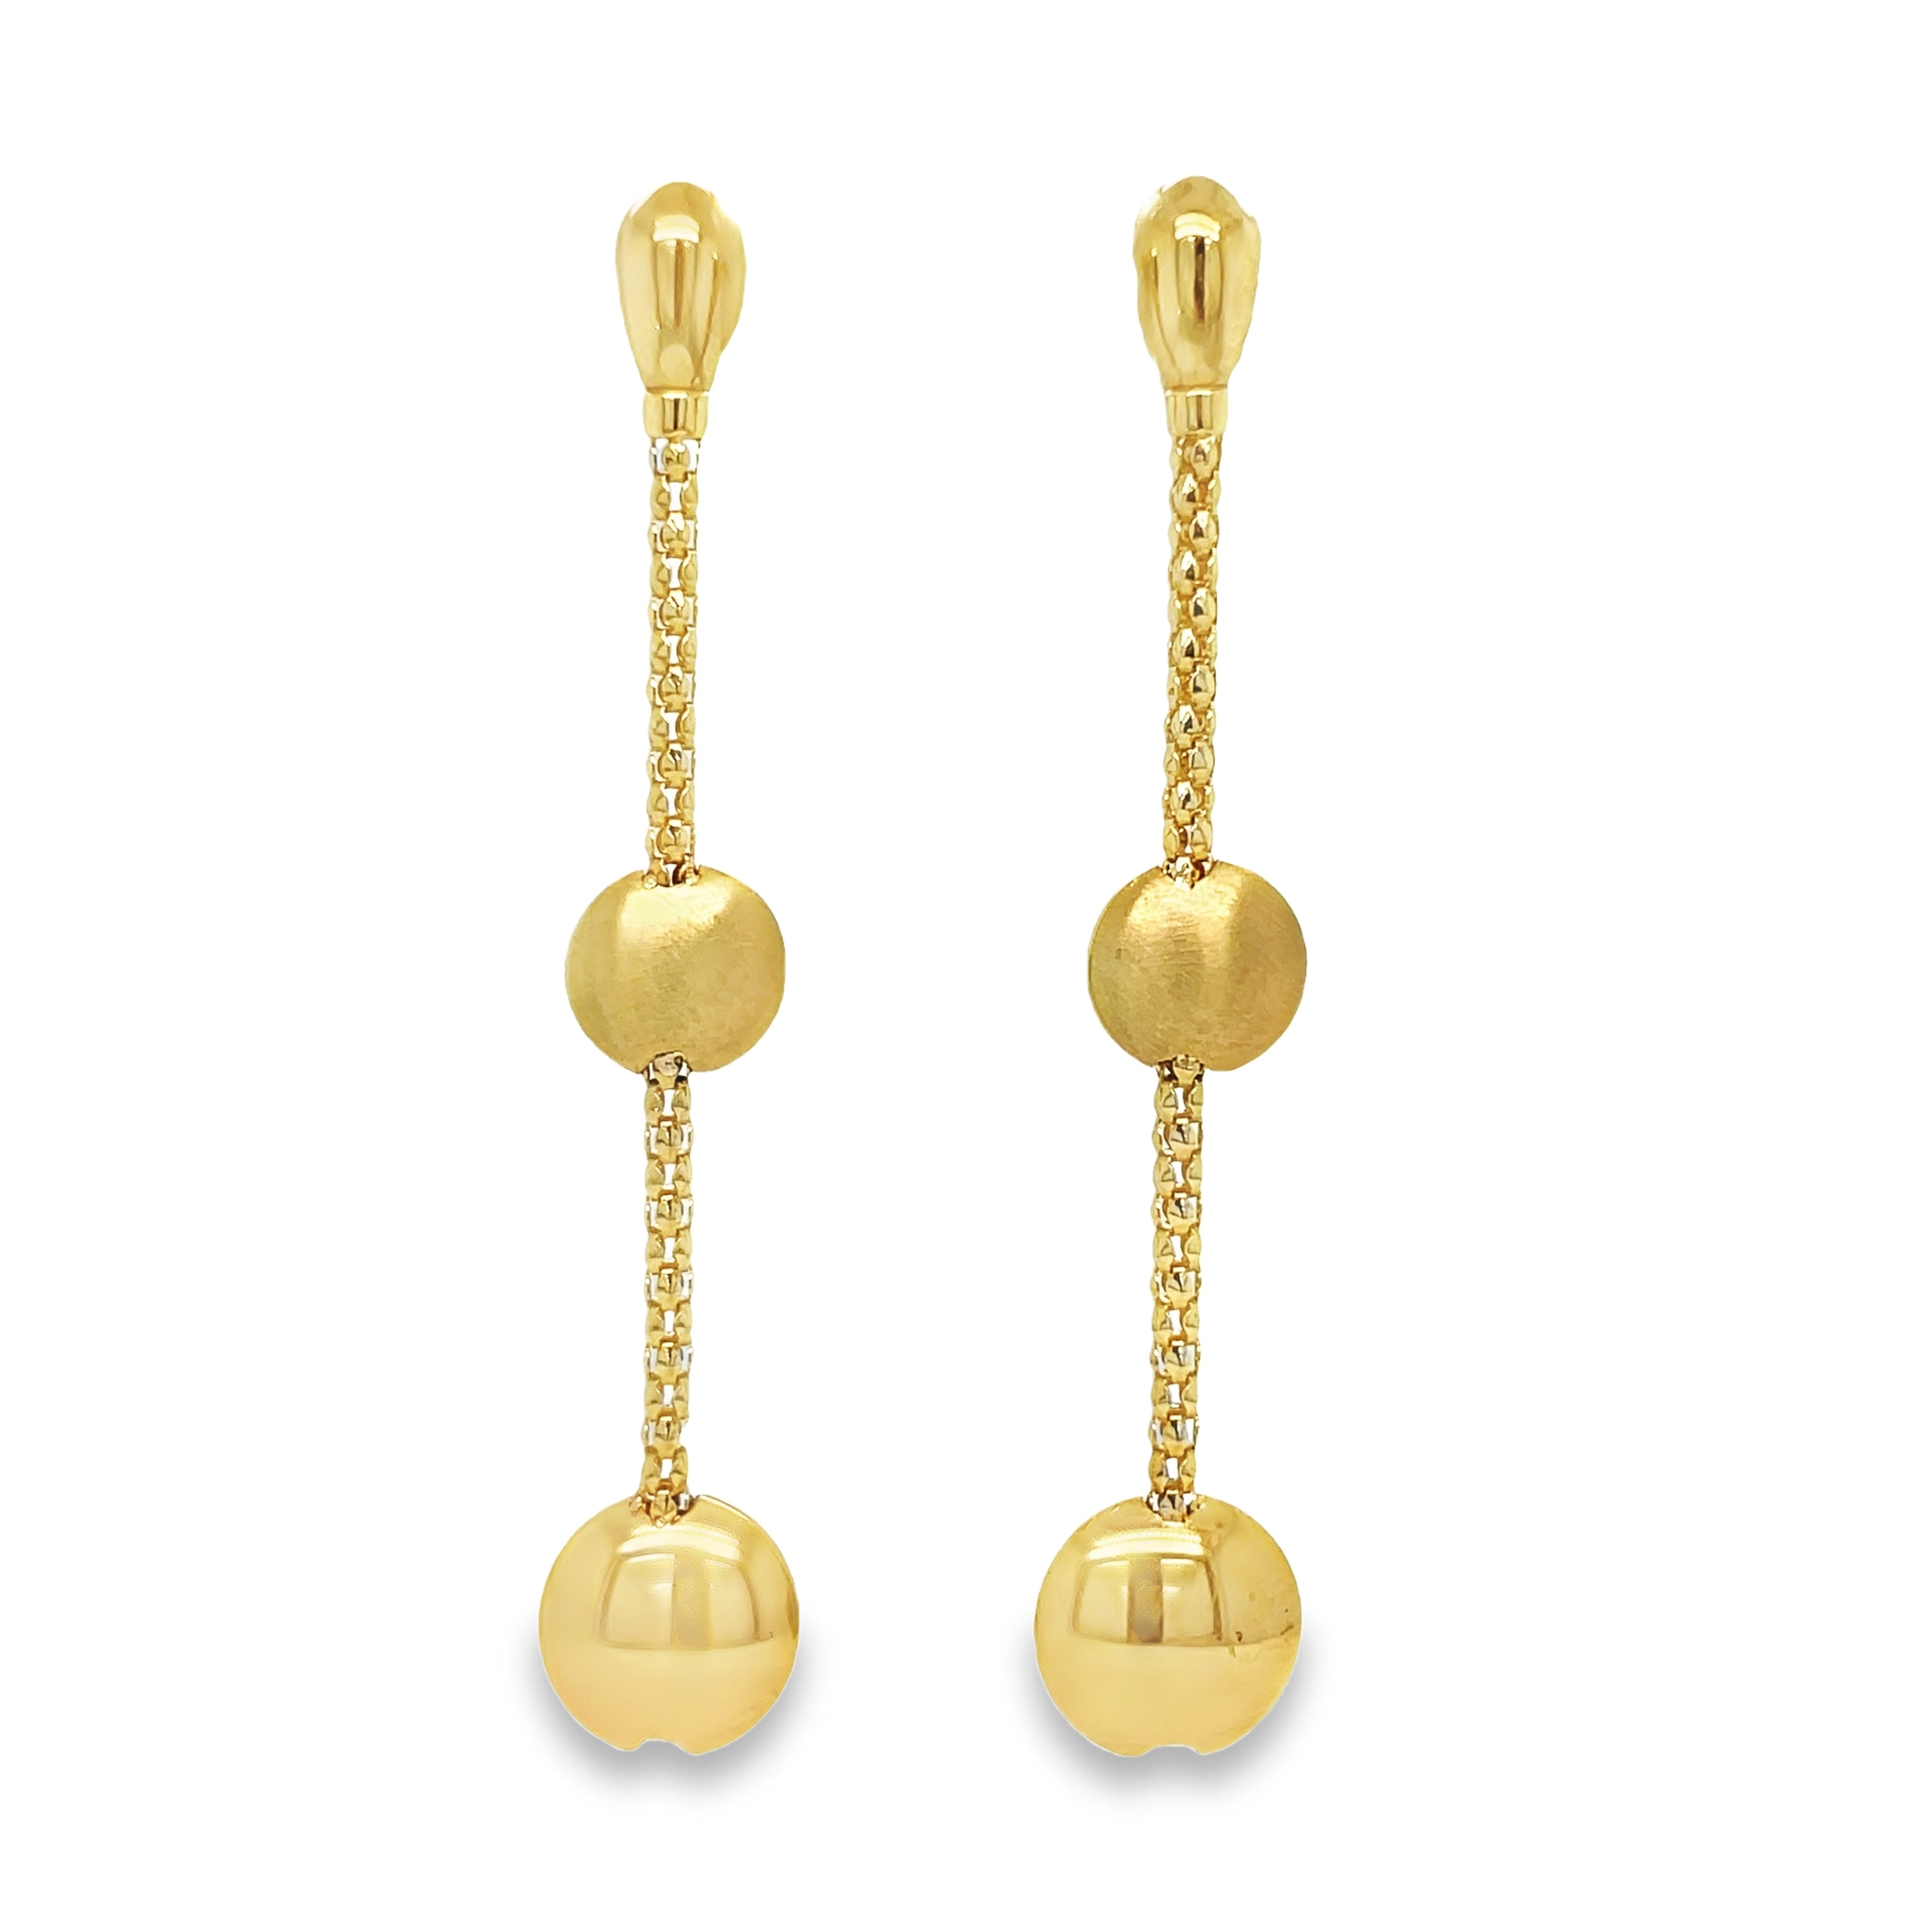 Crafted with exquisite precision, these 18k yellow gold drop earrings are a must-have for any jewelry collection. Made in Italy as part of the Stella collection, these earrings feature a stunning matte and high polished finish. With a long drop of 2 inches, they are sure to make a statement.